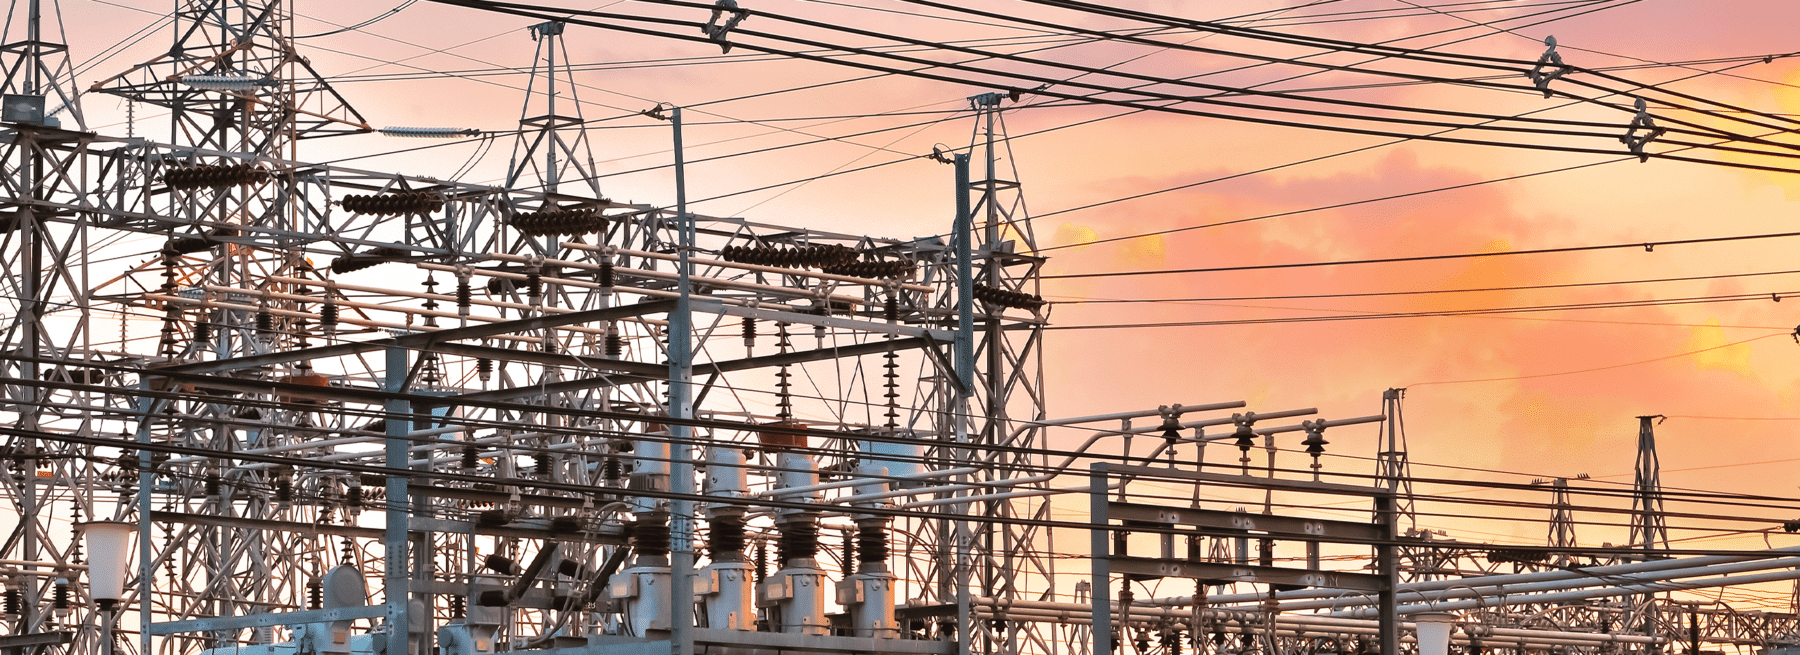 Power stations physical security needs